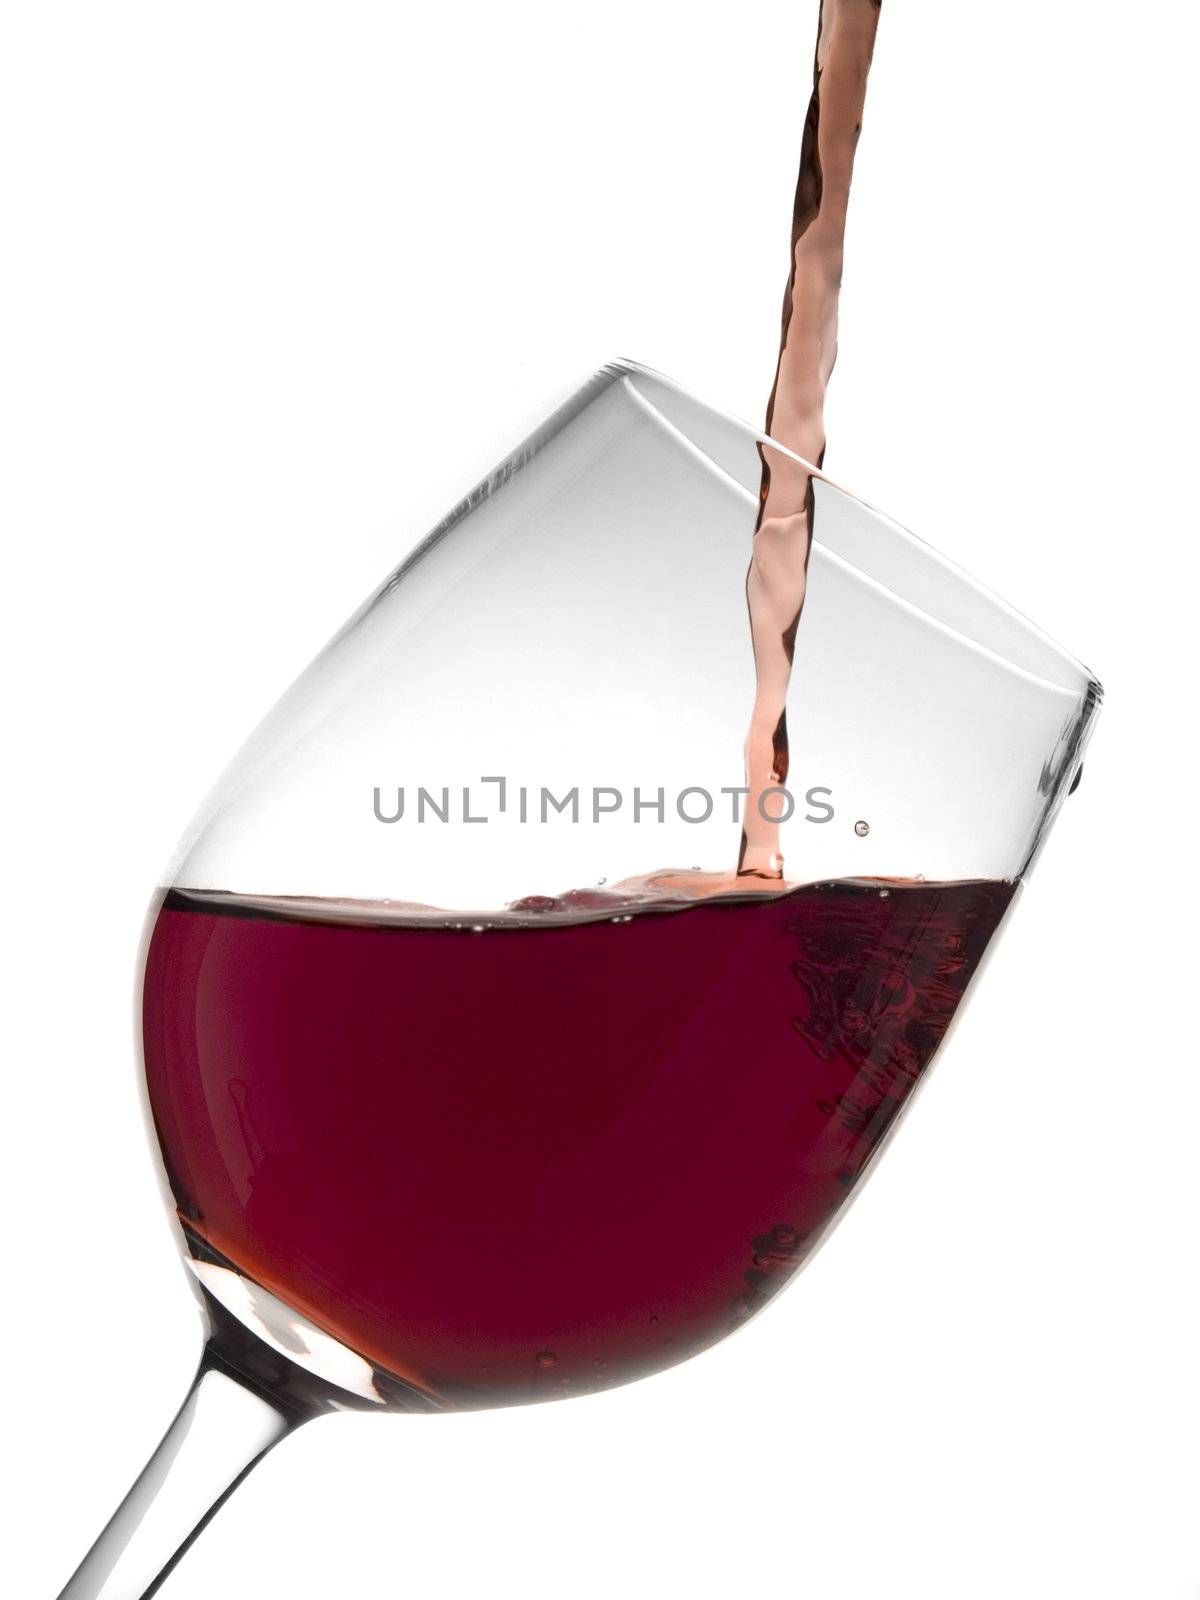 A malbec glass being poured with red wine.